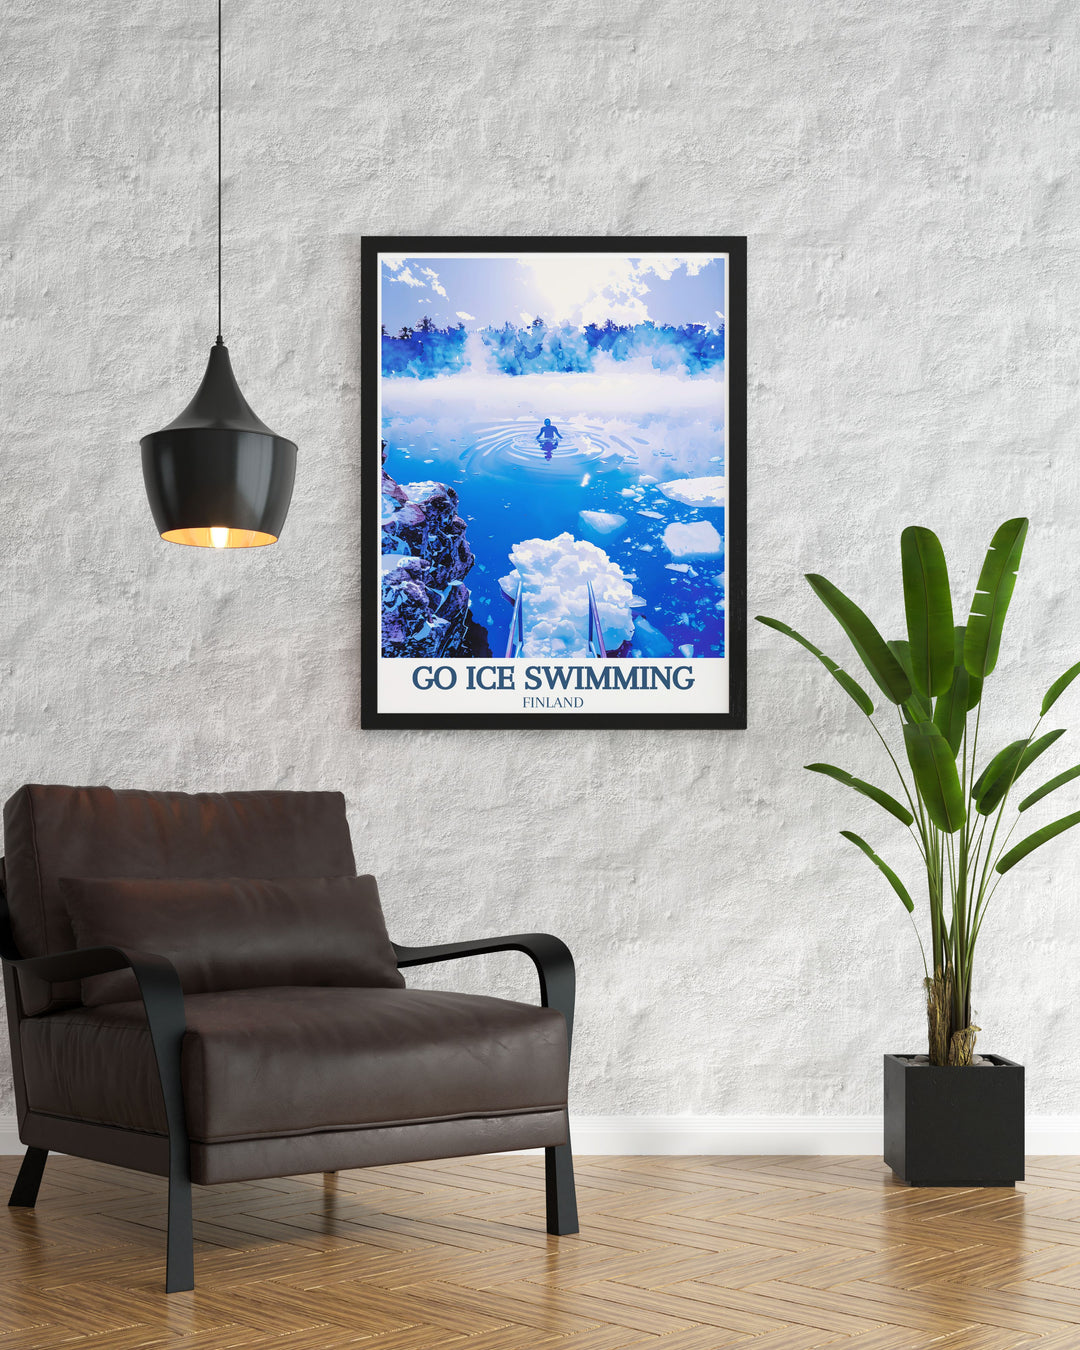 Detailed illustration of Lake Inari, showcasing the pristine waters and lush surrounding landscape, highlighting the lakes natural beauty and tranquility, ideal for enhancing your home decor with a touch of nature.